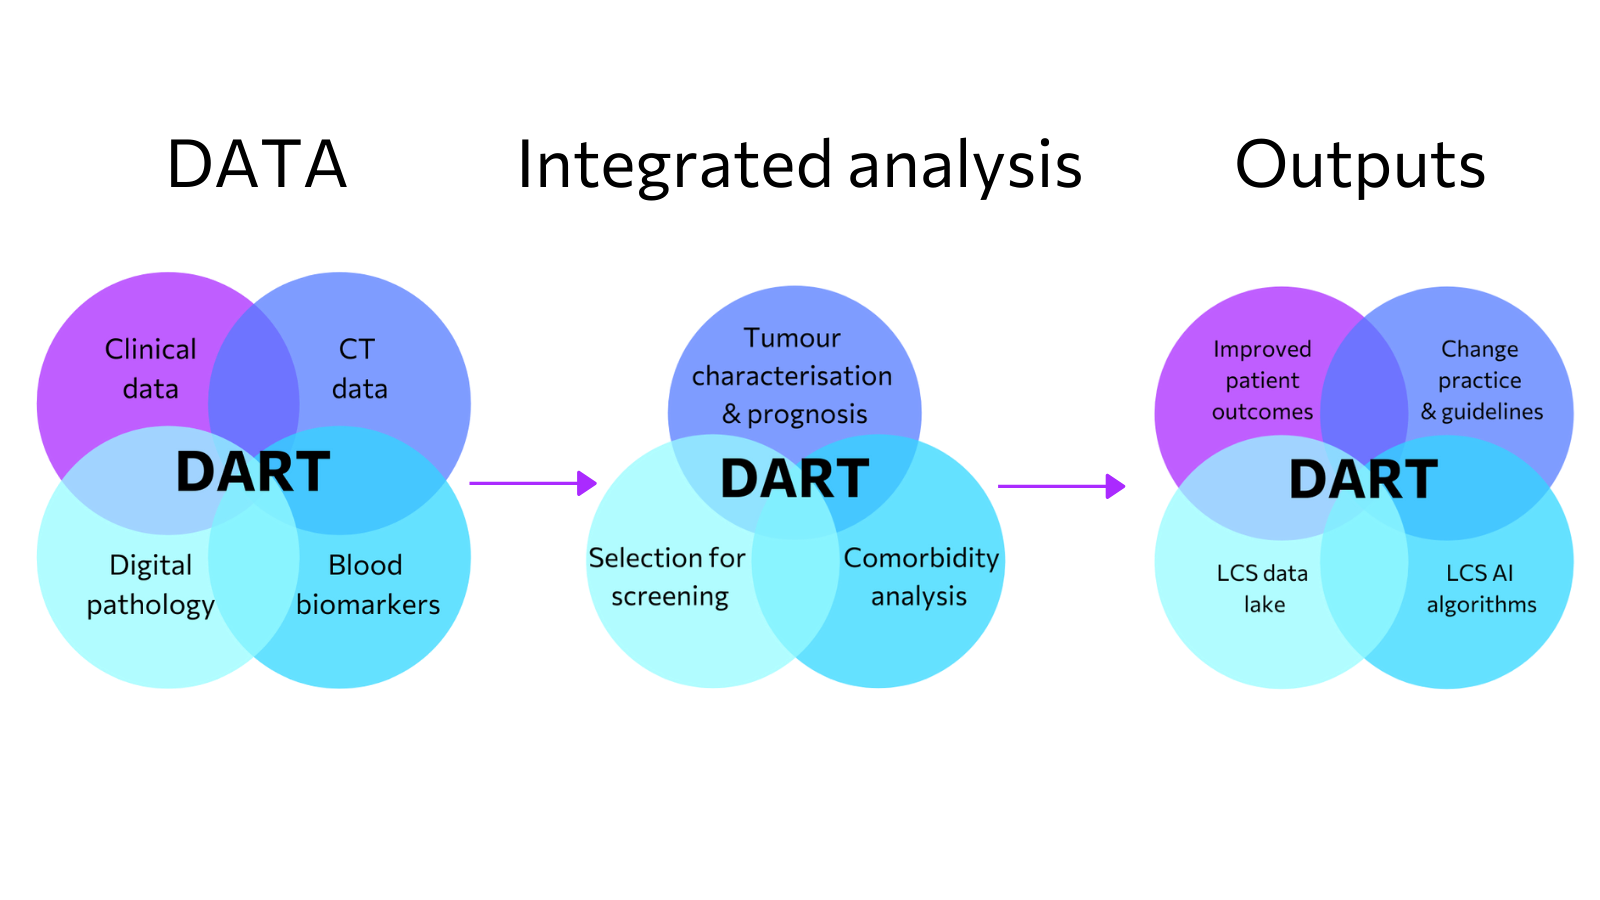 Want to know more about DART project aims objectives? DART